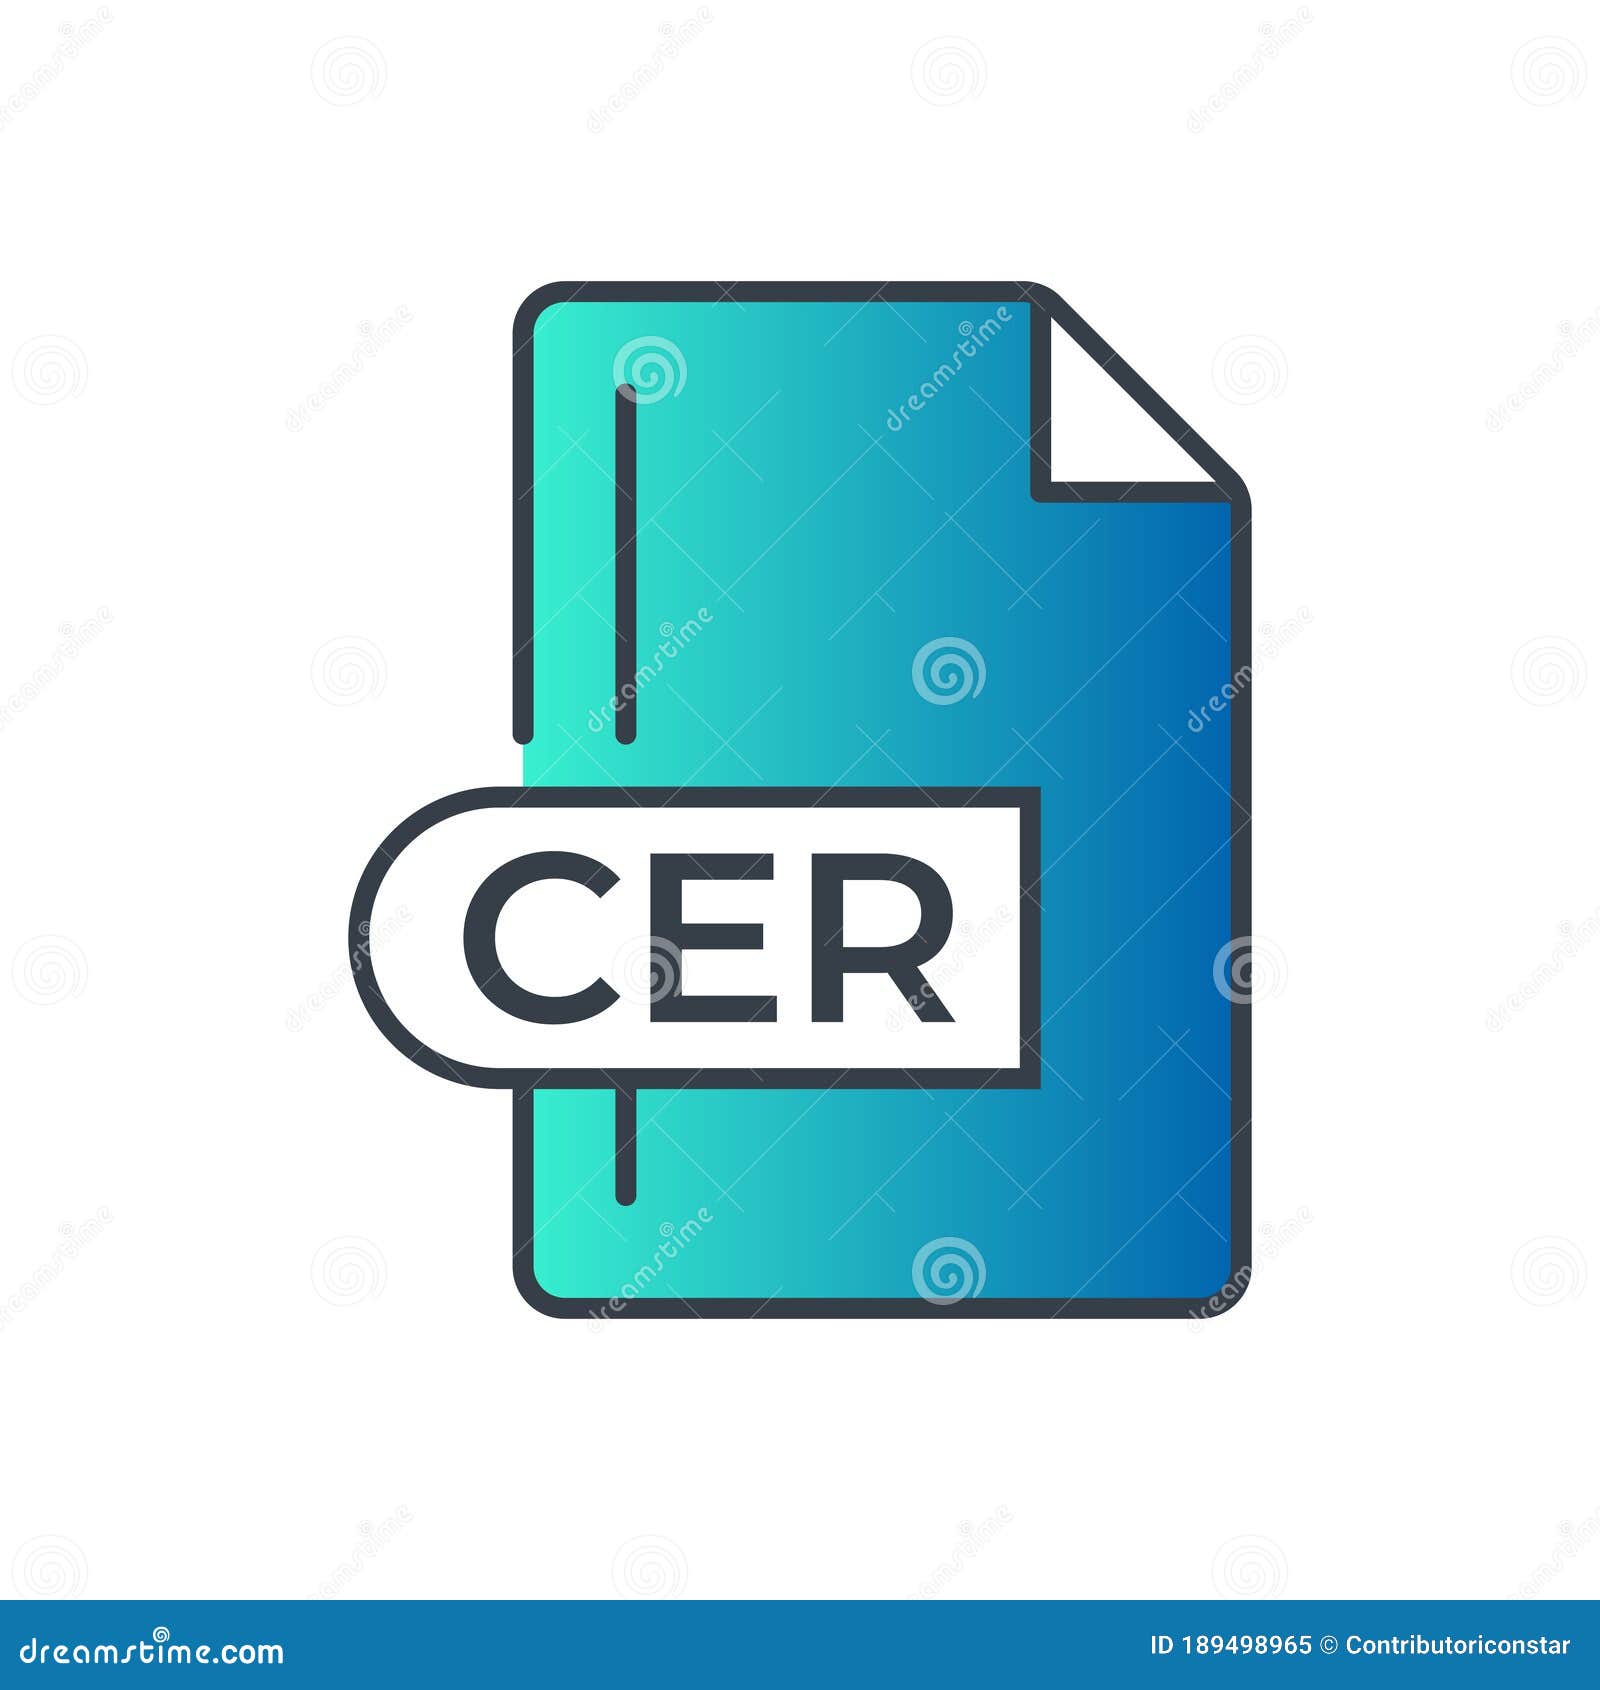 cer file format icon. cer extension gradiant icon